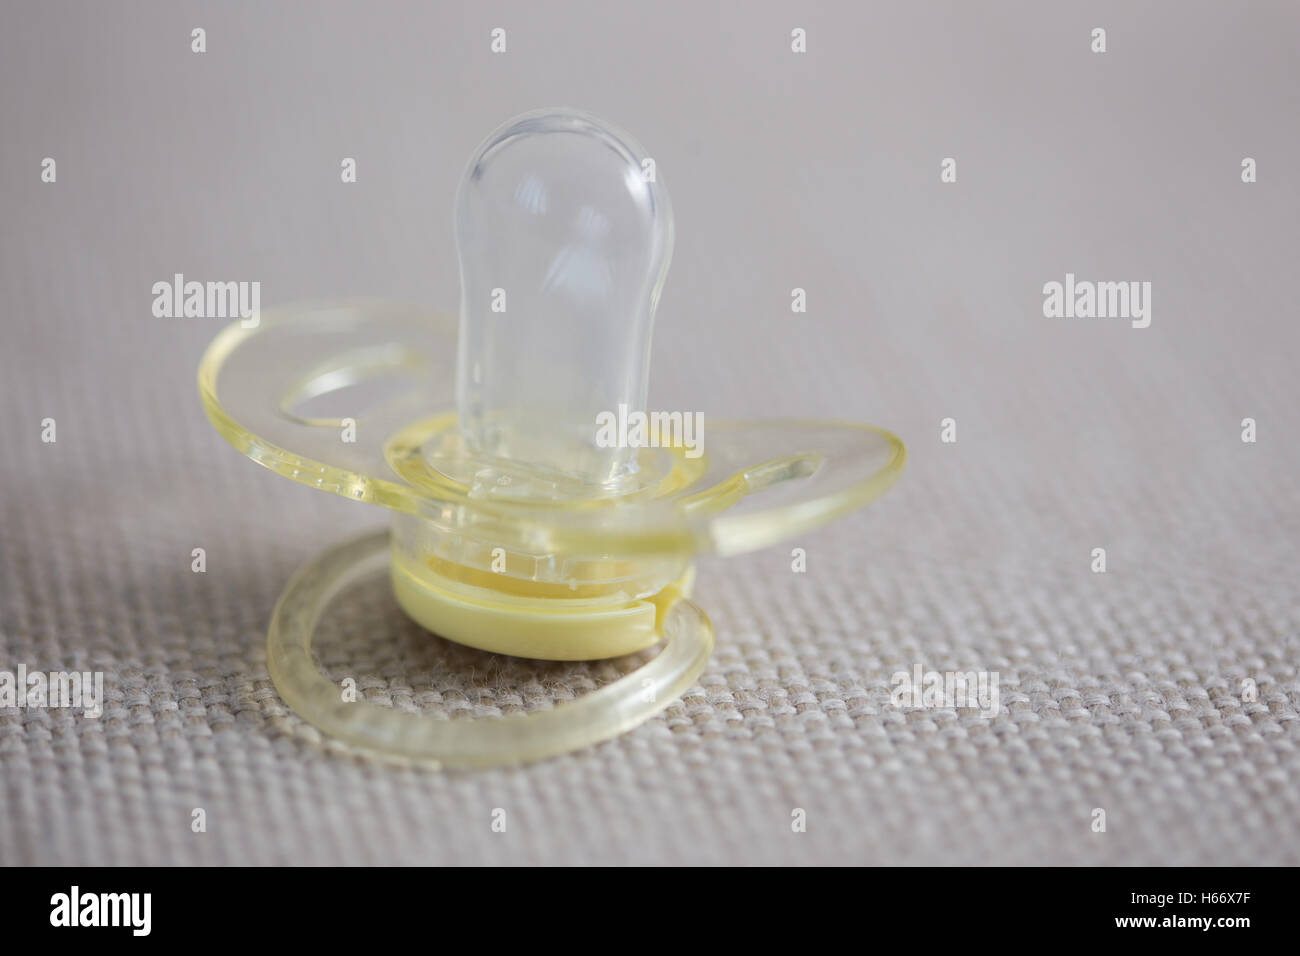 Silicone pacifier on gray textile background Stock Photo